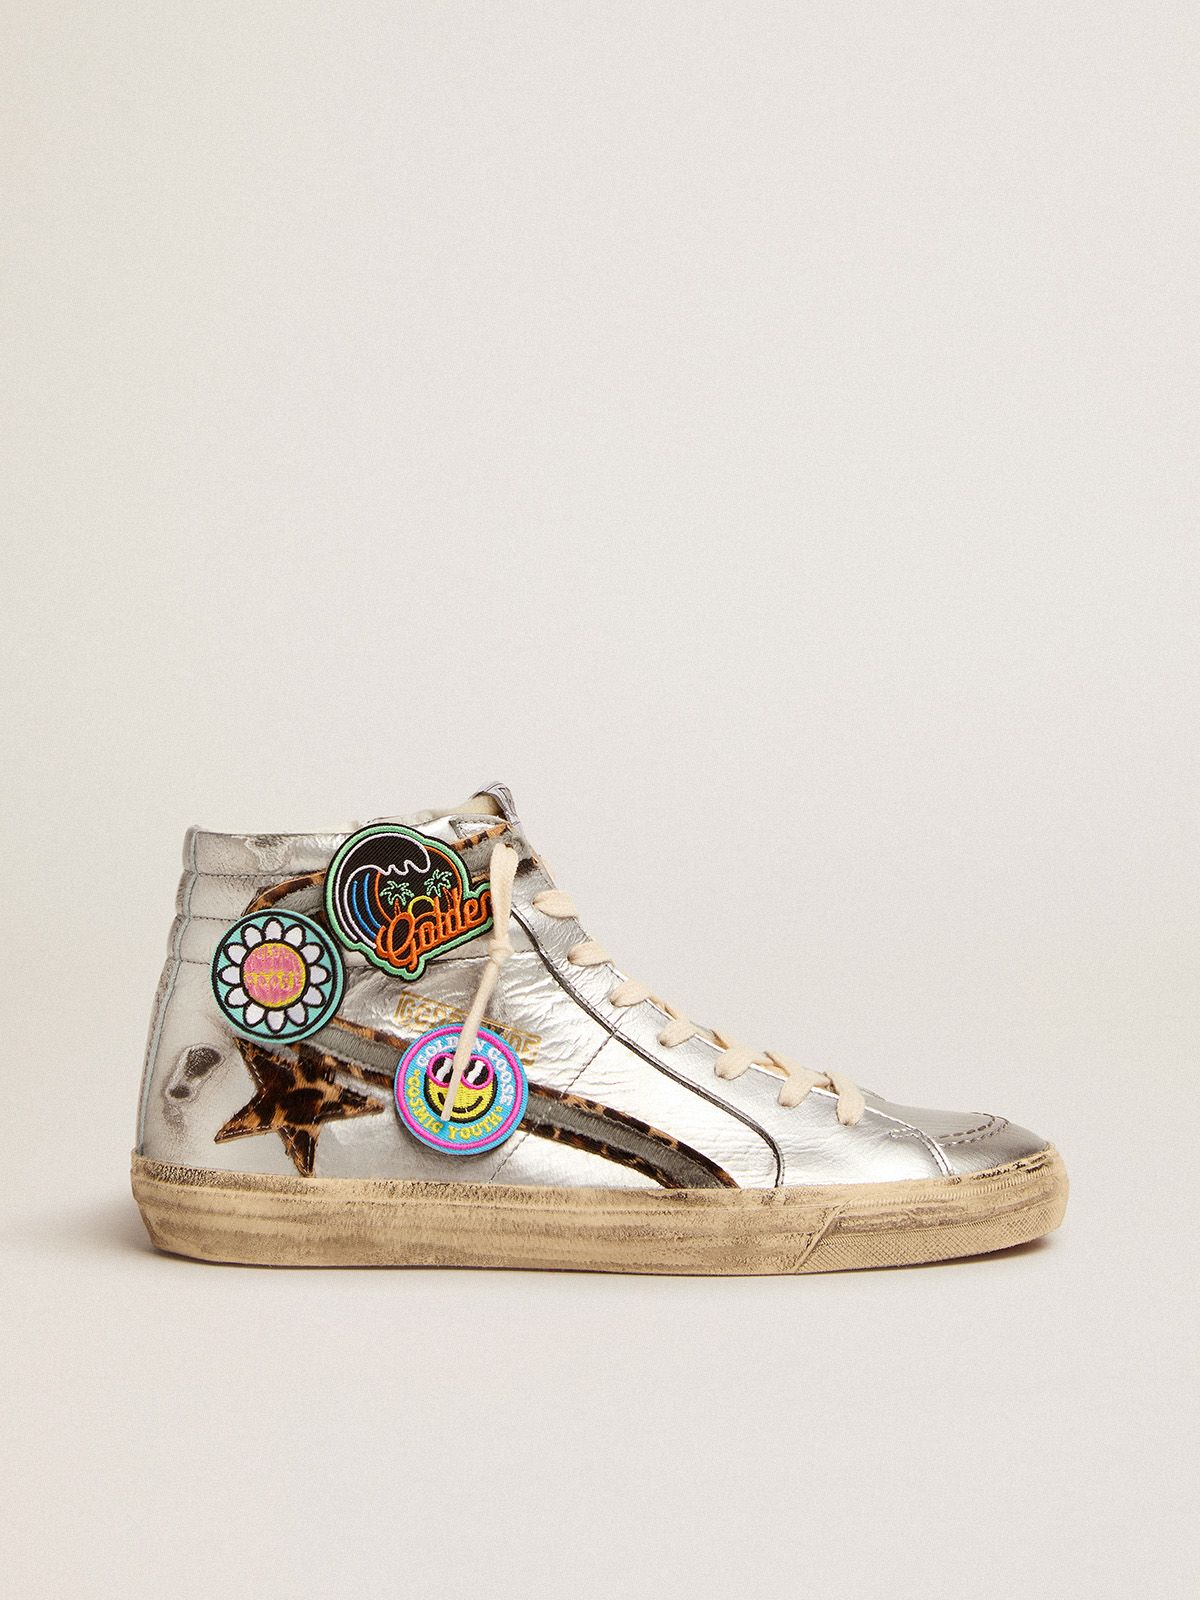 Golden Goose Donna Sneakers Slide sneakers in silver laminated leather with leopard-print pony skin star and flash with detachable multicolored patches